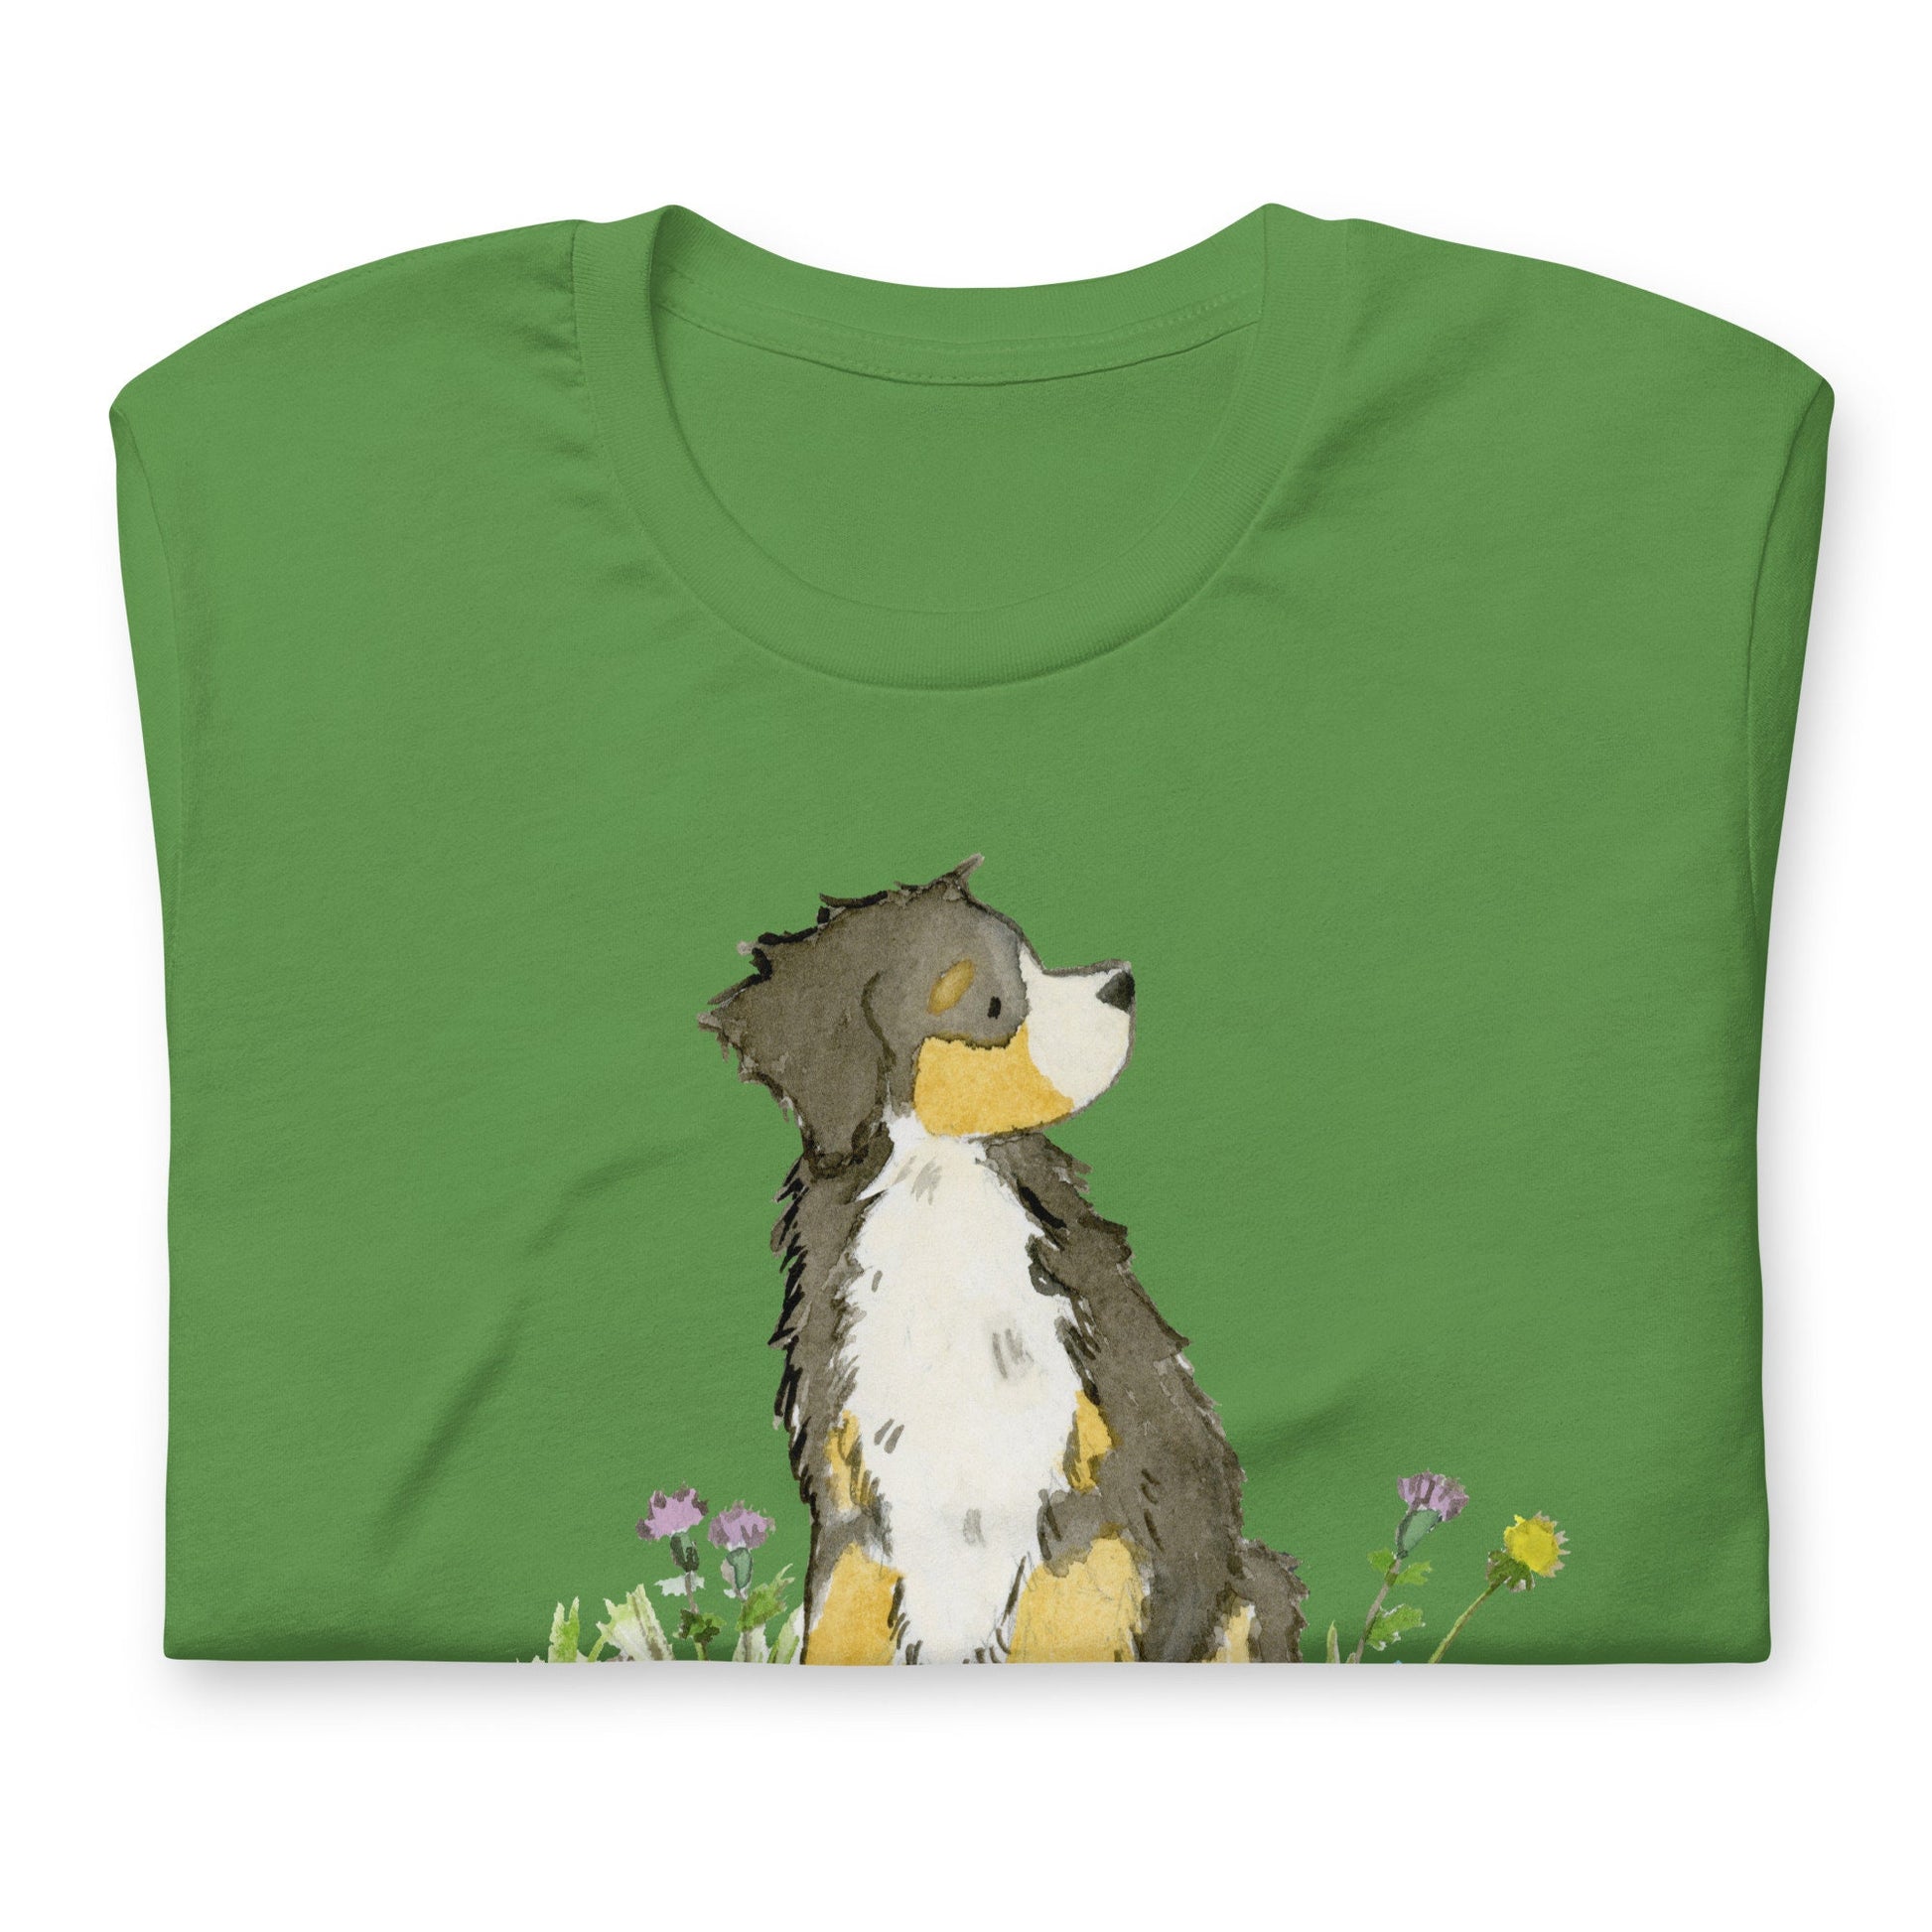 Folded green tee with cute Bernese mountain dog artwork on it.